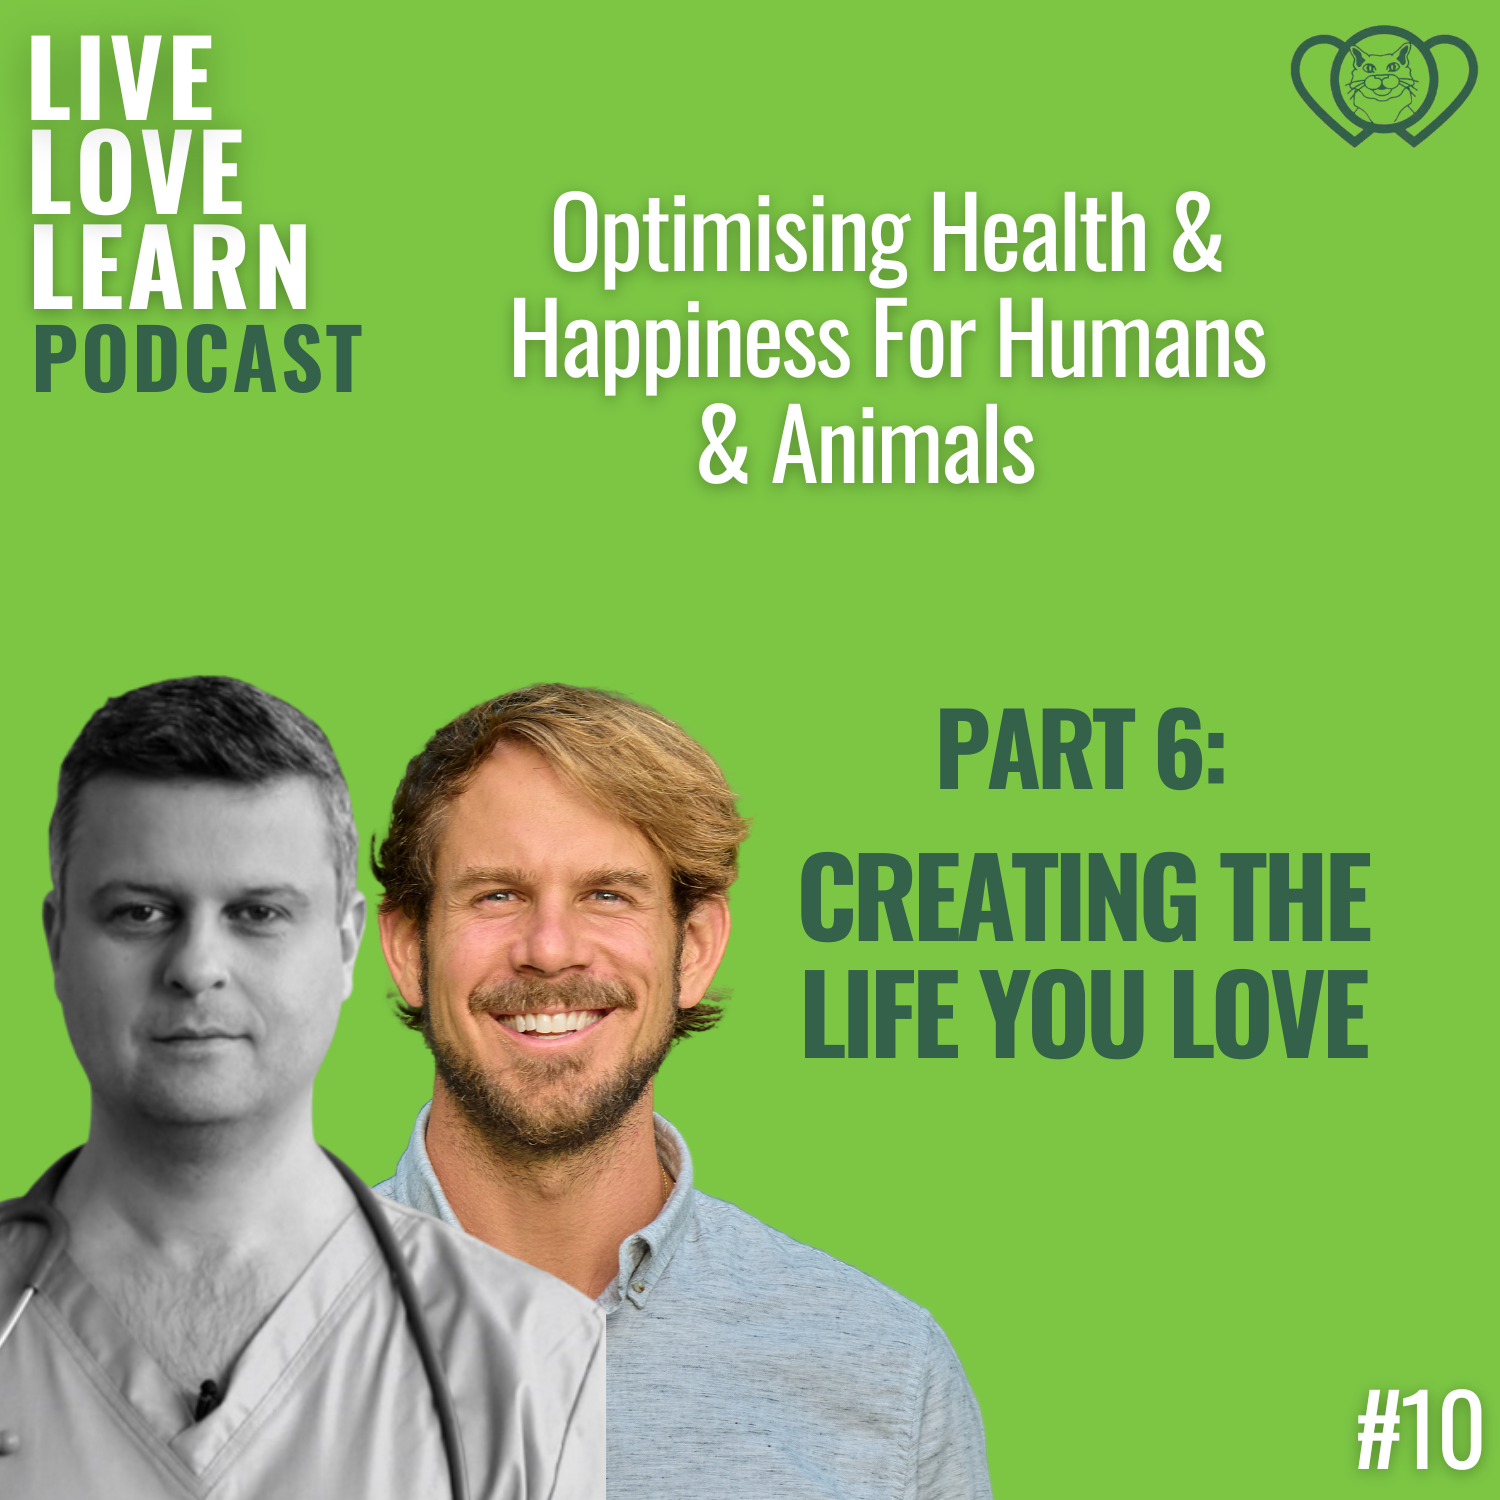 Artwork for podcast Live - Love - Learn with Catherine Edwards